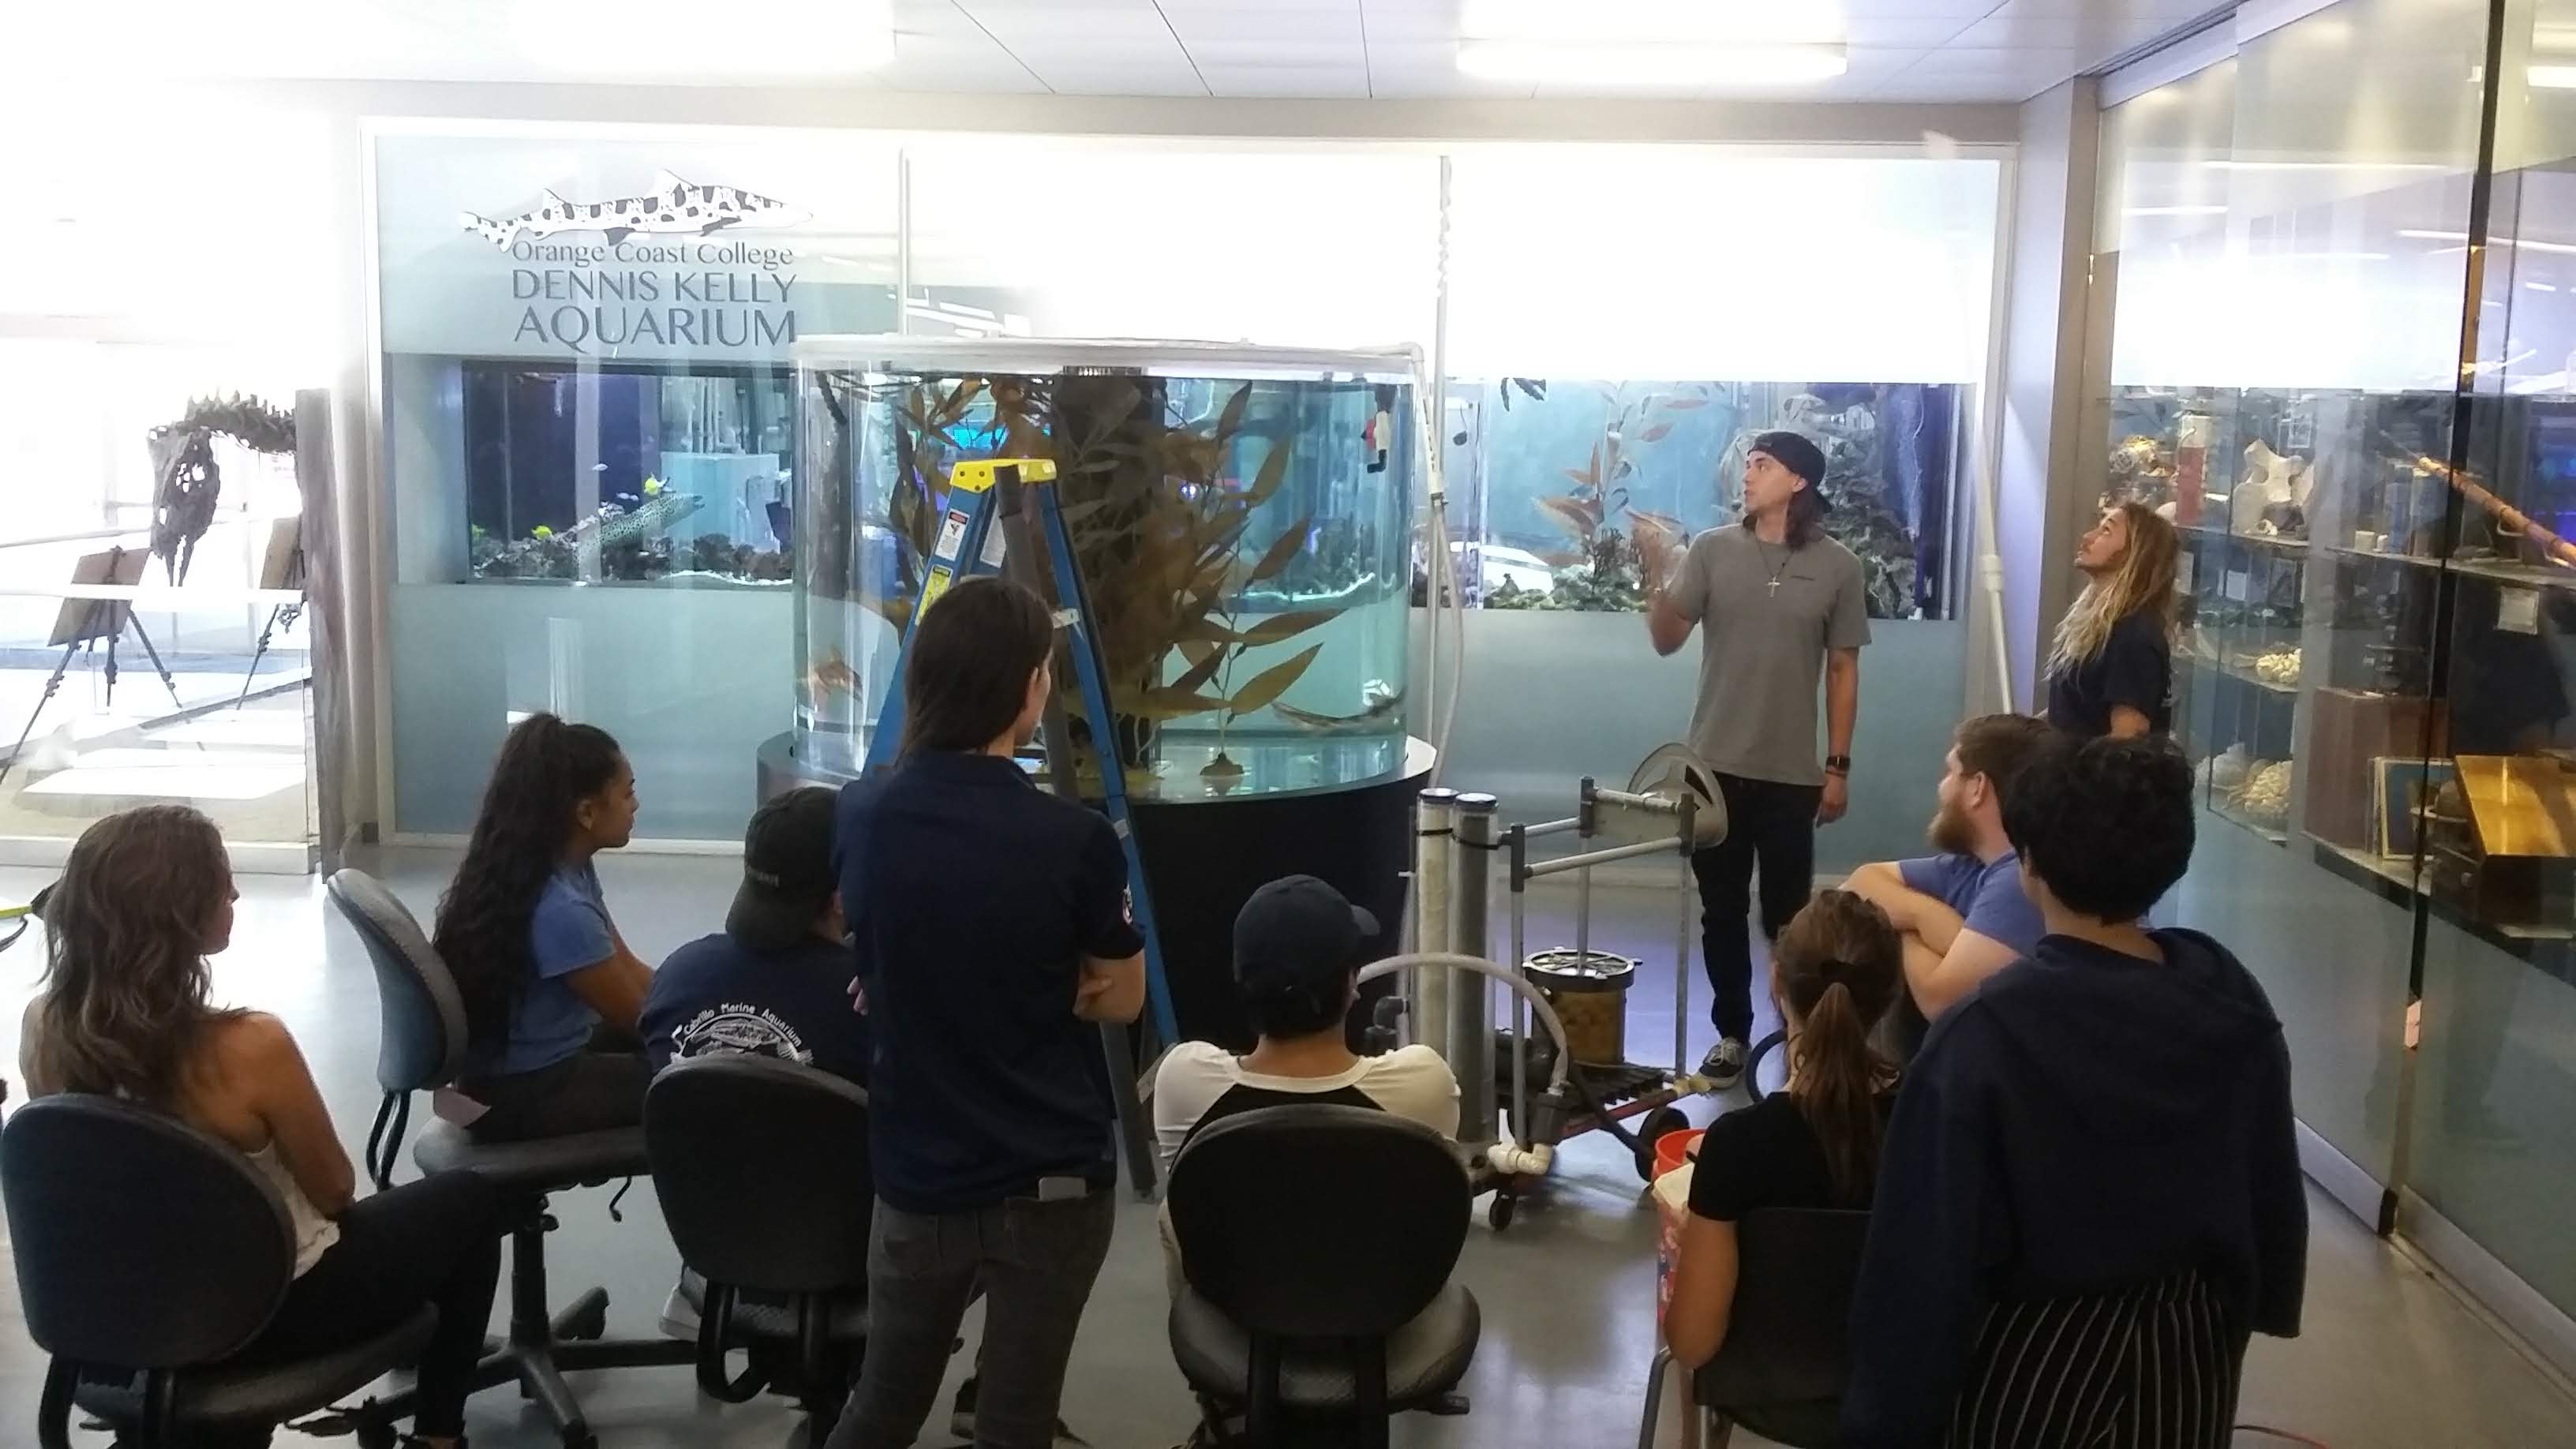 Students learning to properly maintain the shark exhibit